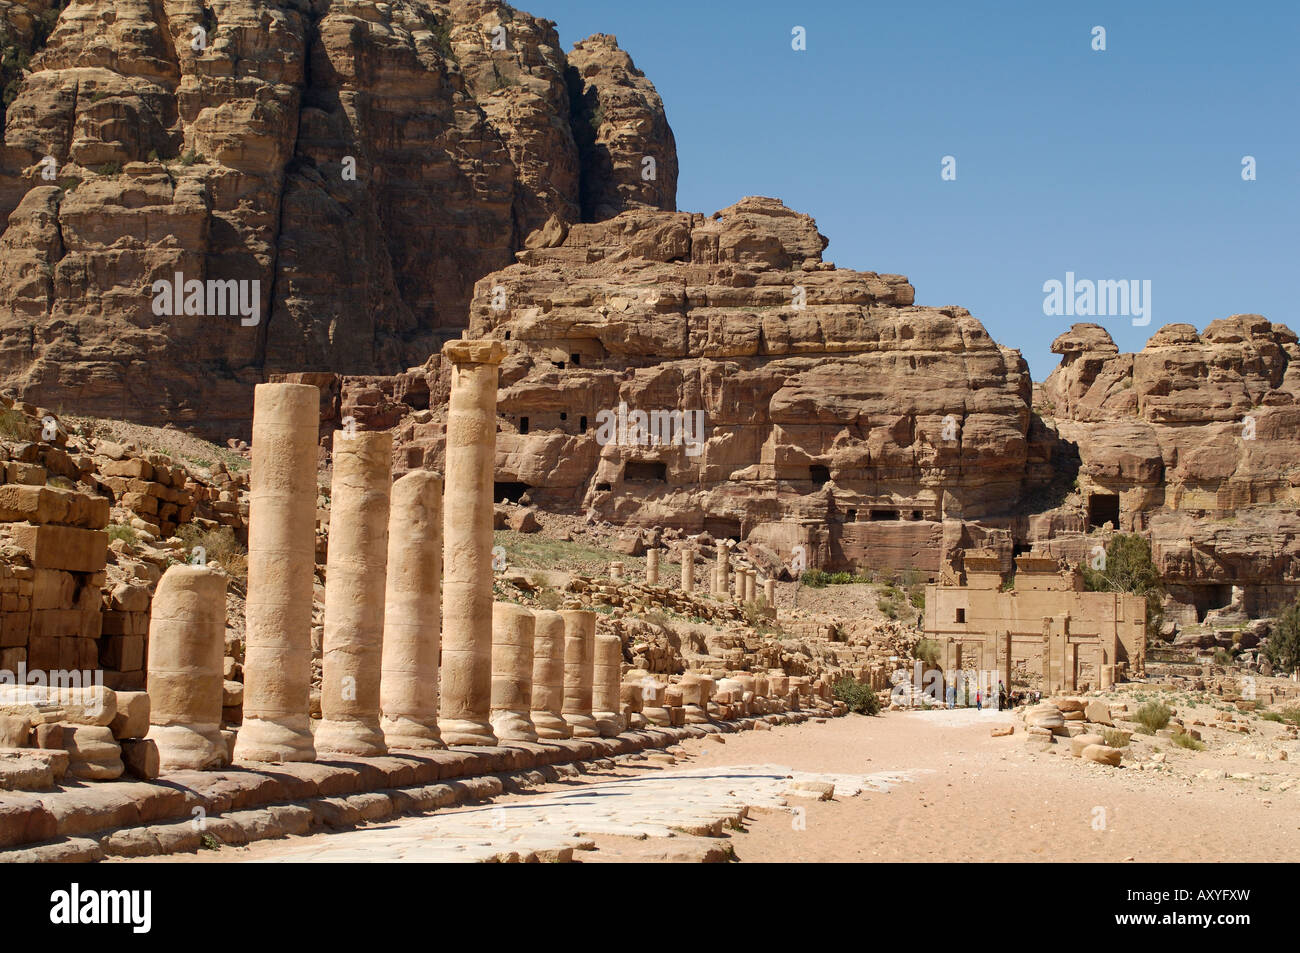 Colonnaded street, Petra, UNESCO World Heritage Site, Jordan, Middle East Stock Photo